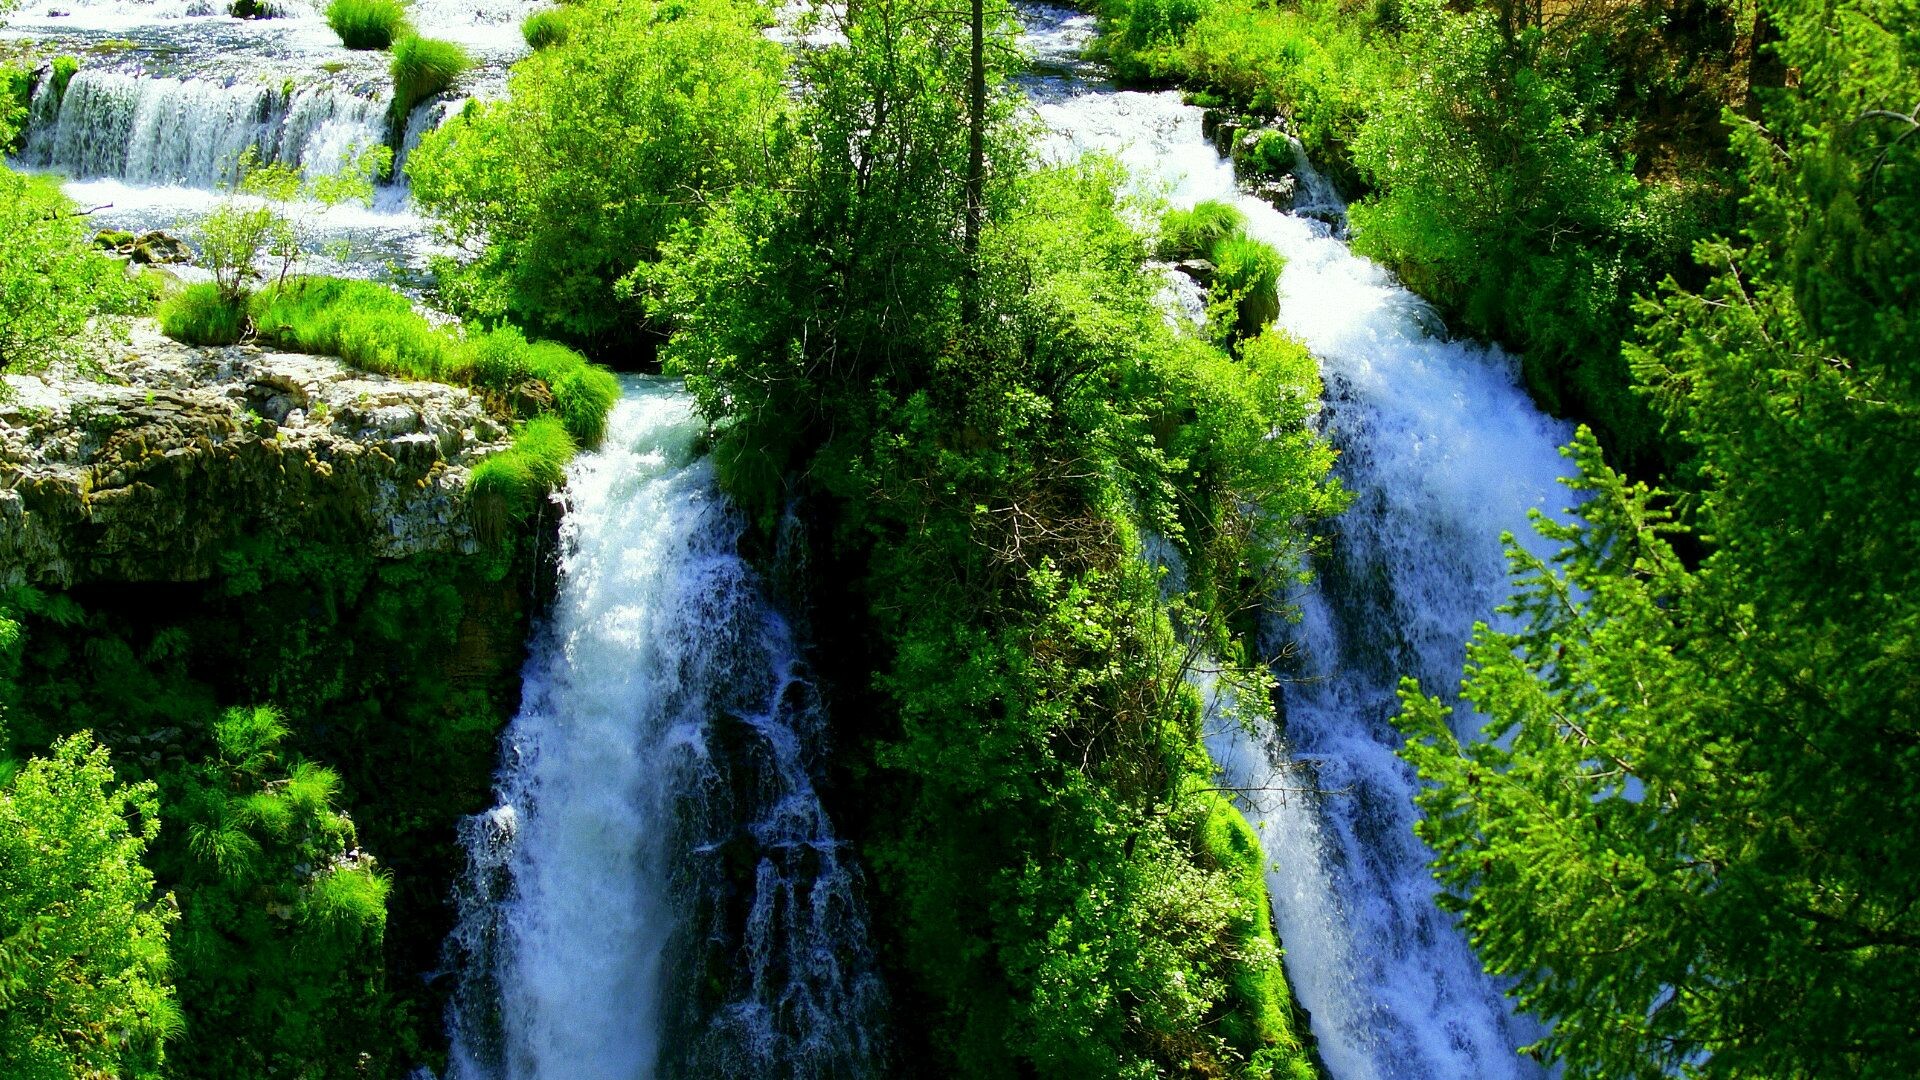 Waterfall: Represent formidable barriers to navigation along rivers. 1920x1080 Full HD Wallpaper.